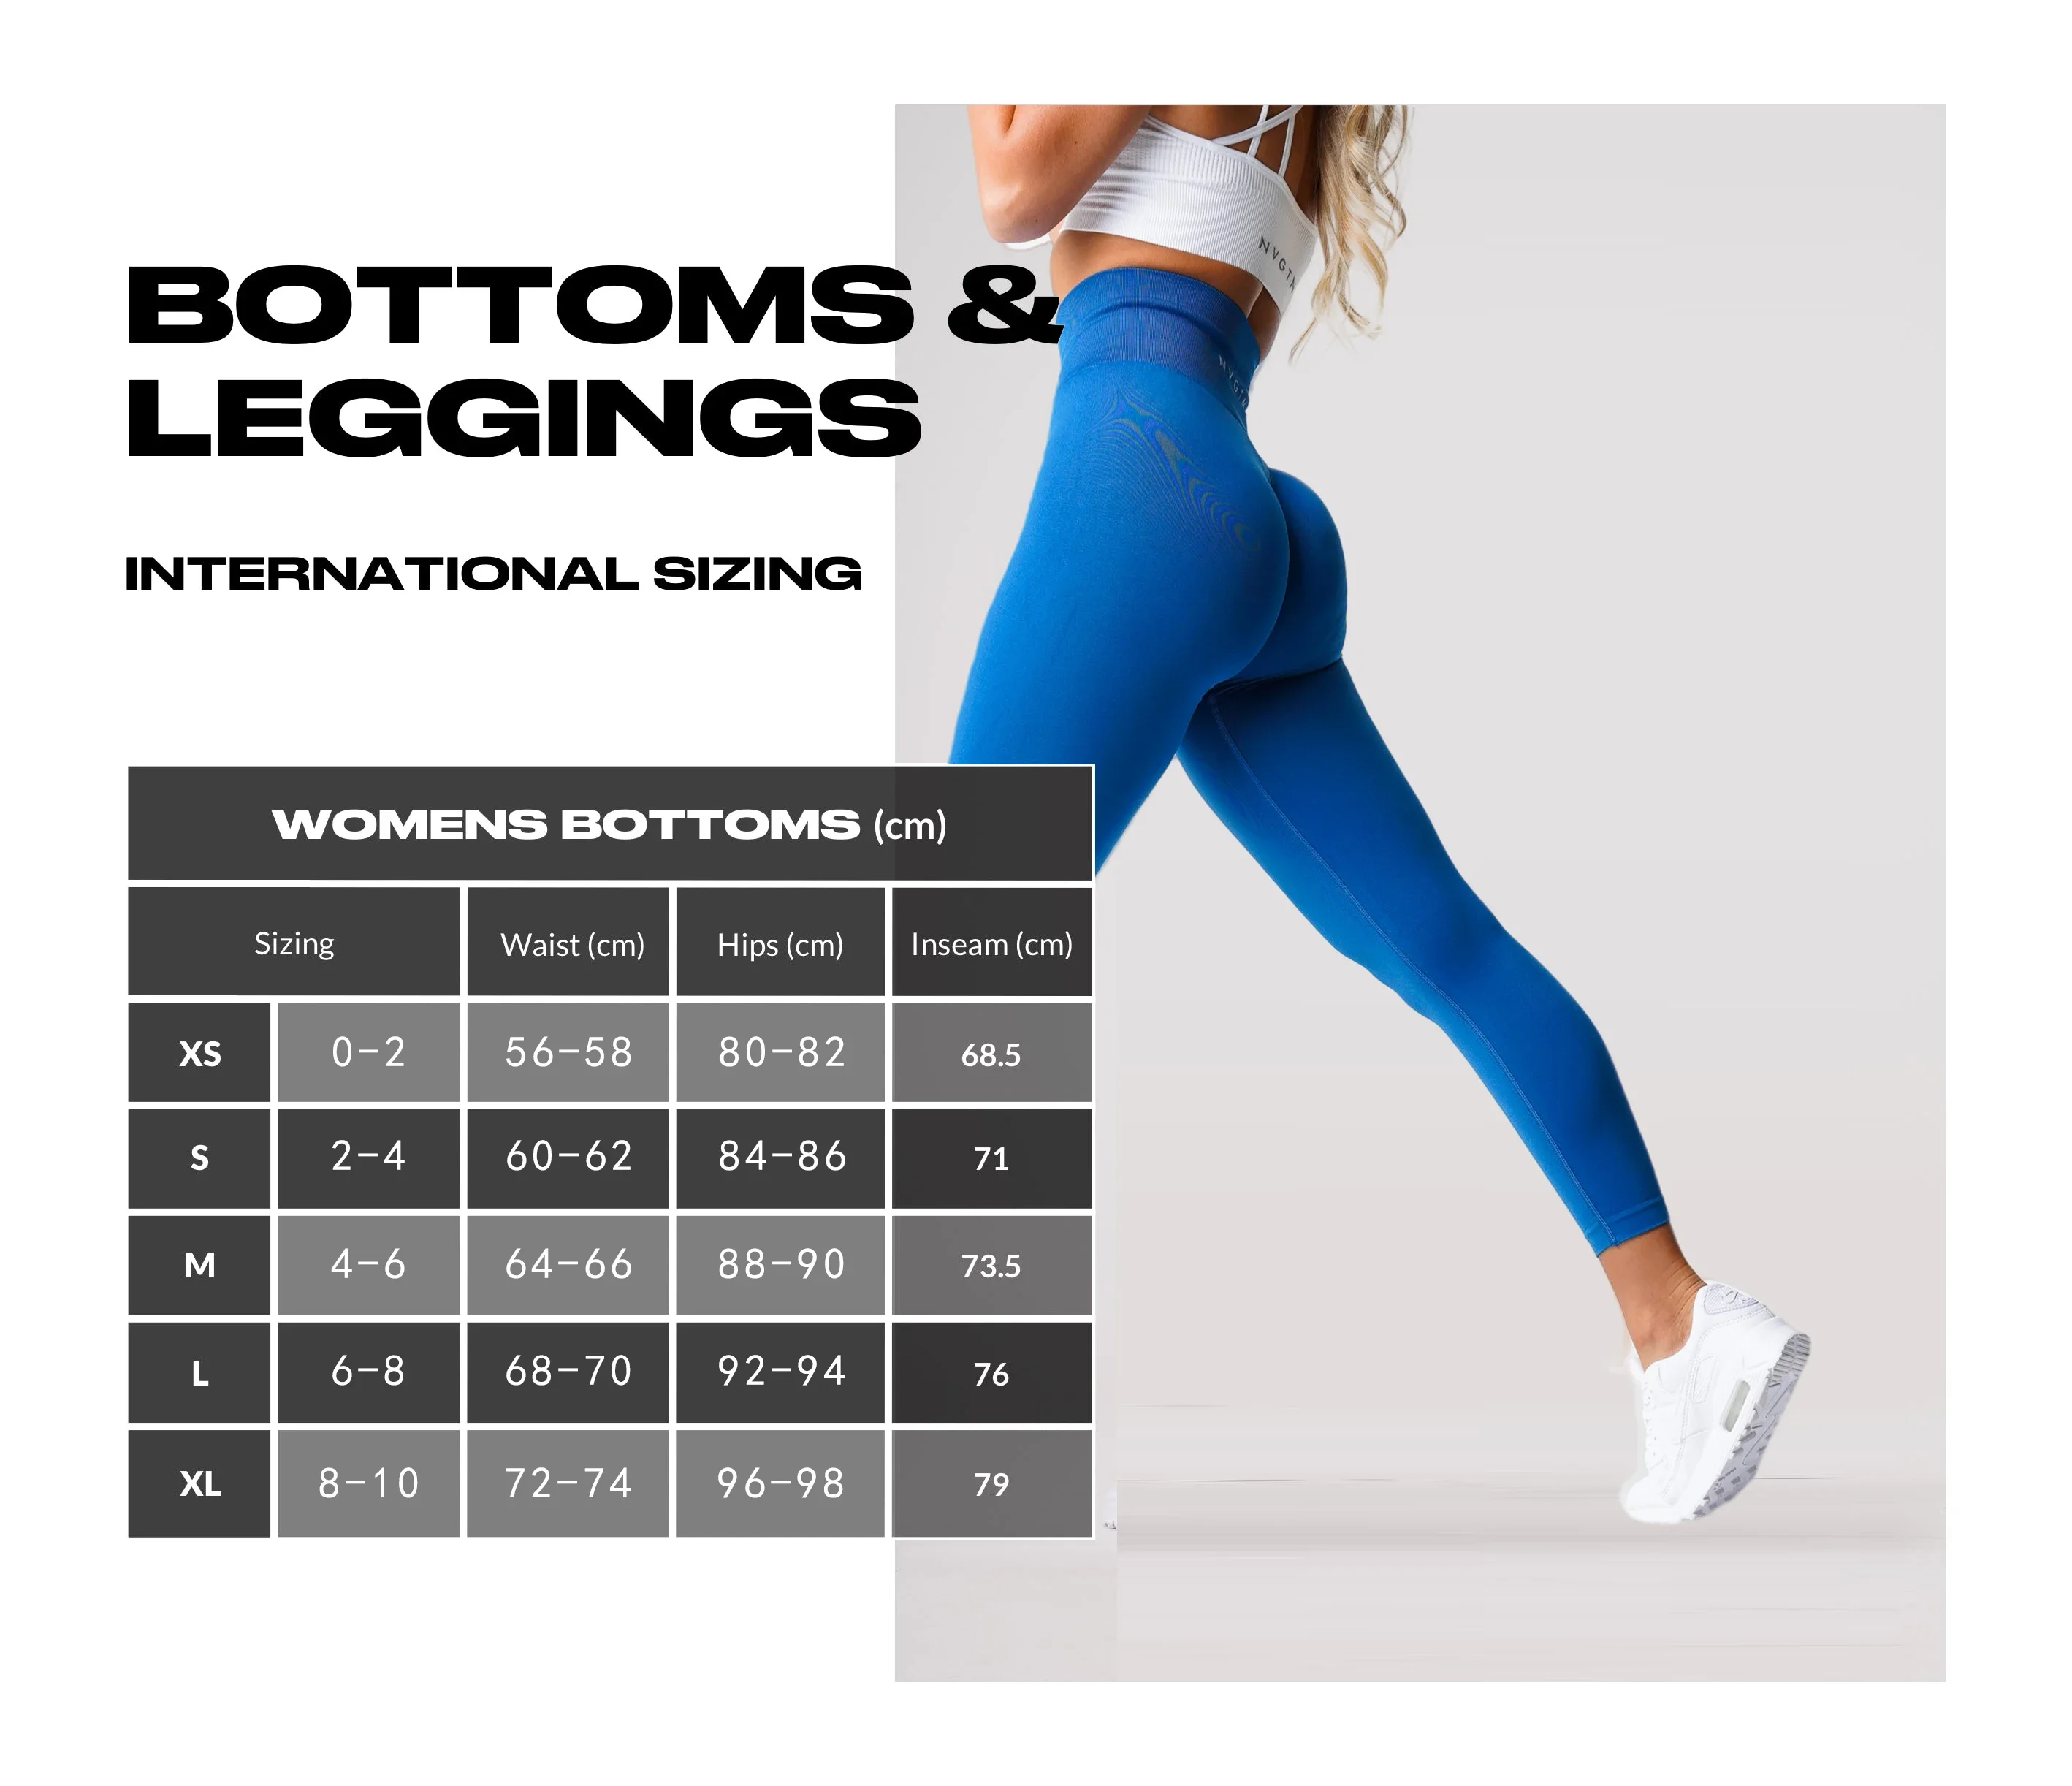 SILKY Nvgtn Logo Solid Seamless Leggings Womens Joga Pants Workout Buttery  Soft Fitness Outfits Gym Tights Sports Wear Pantalons